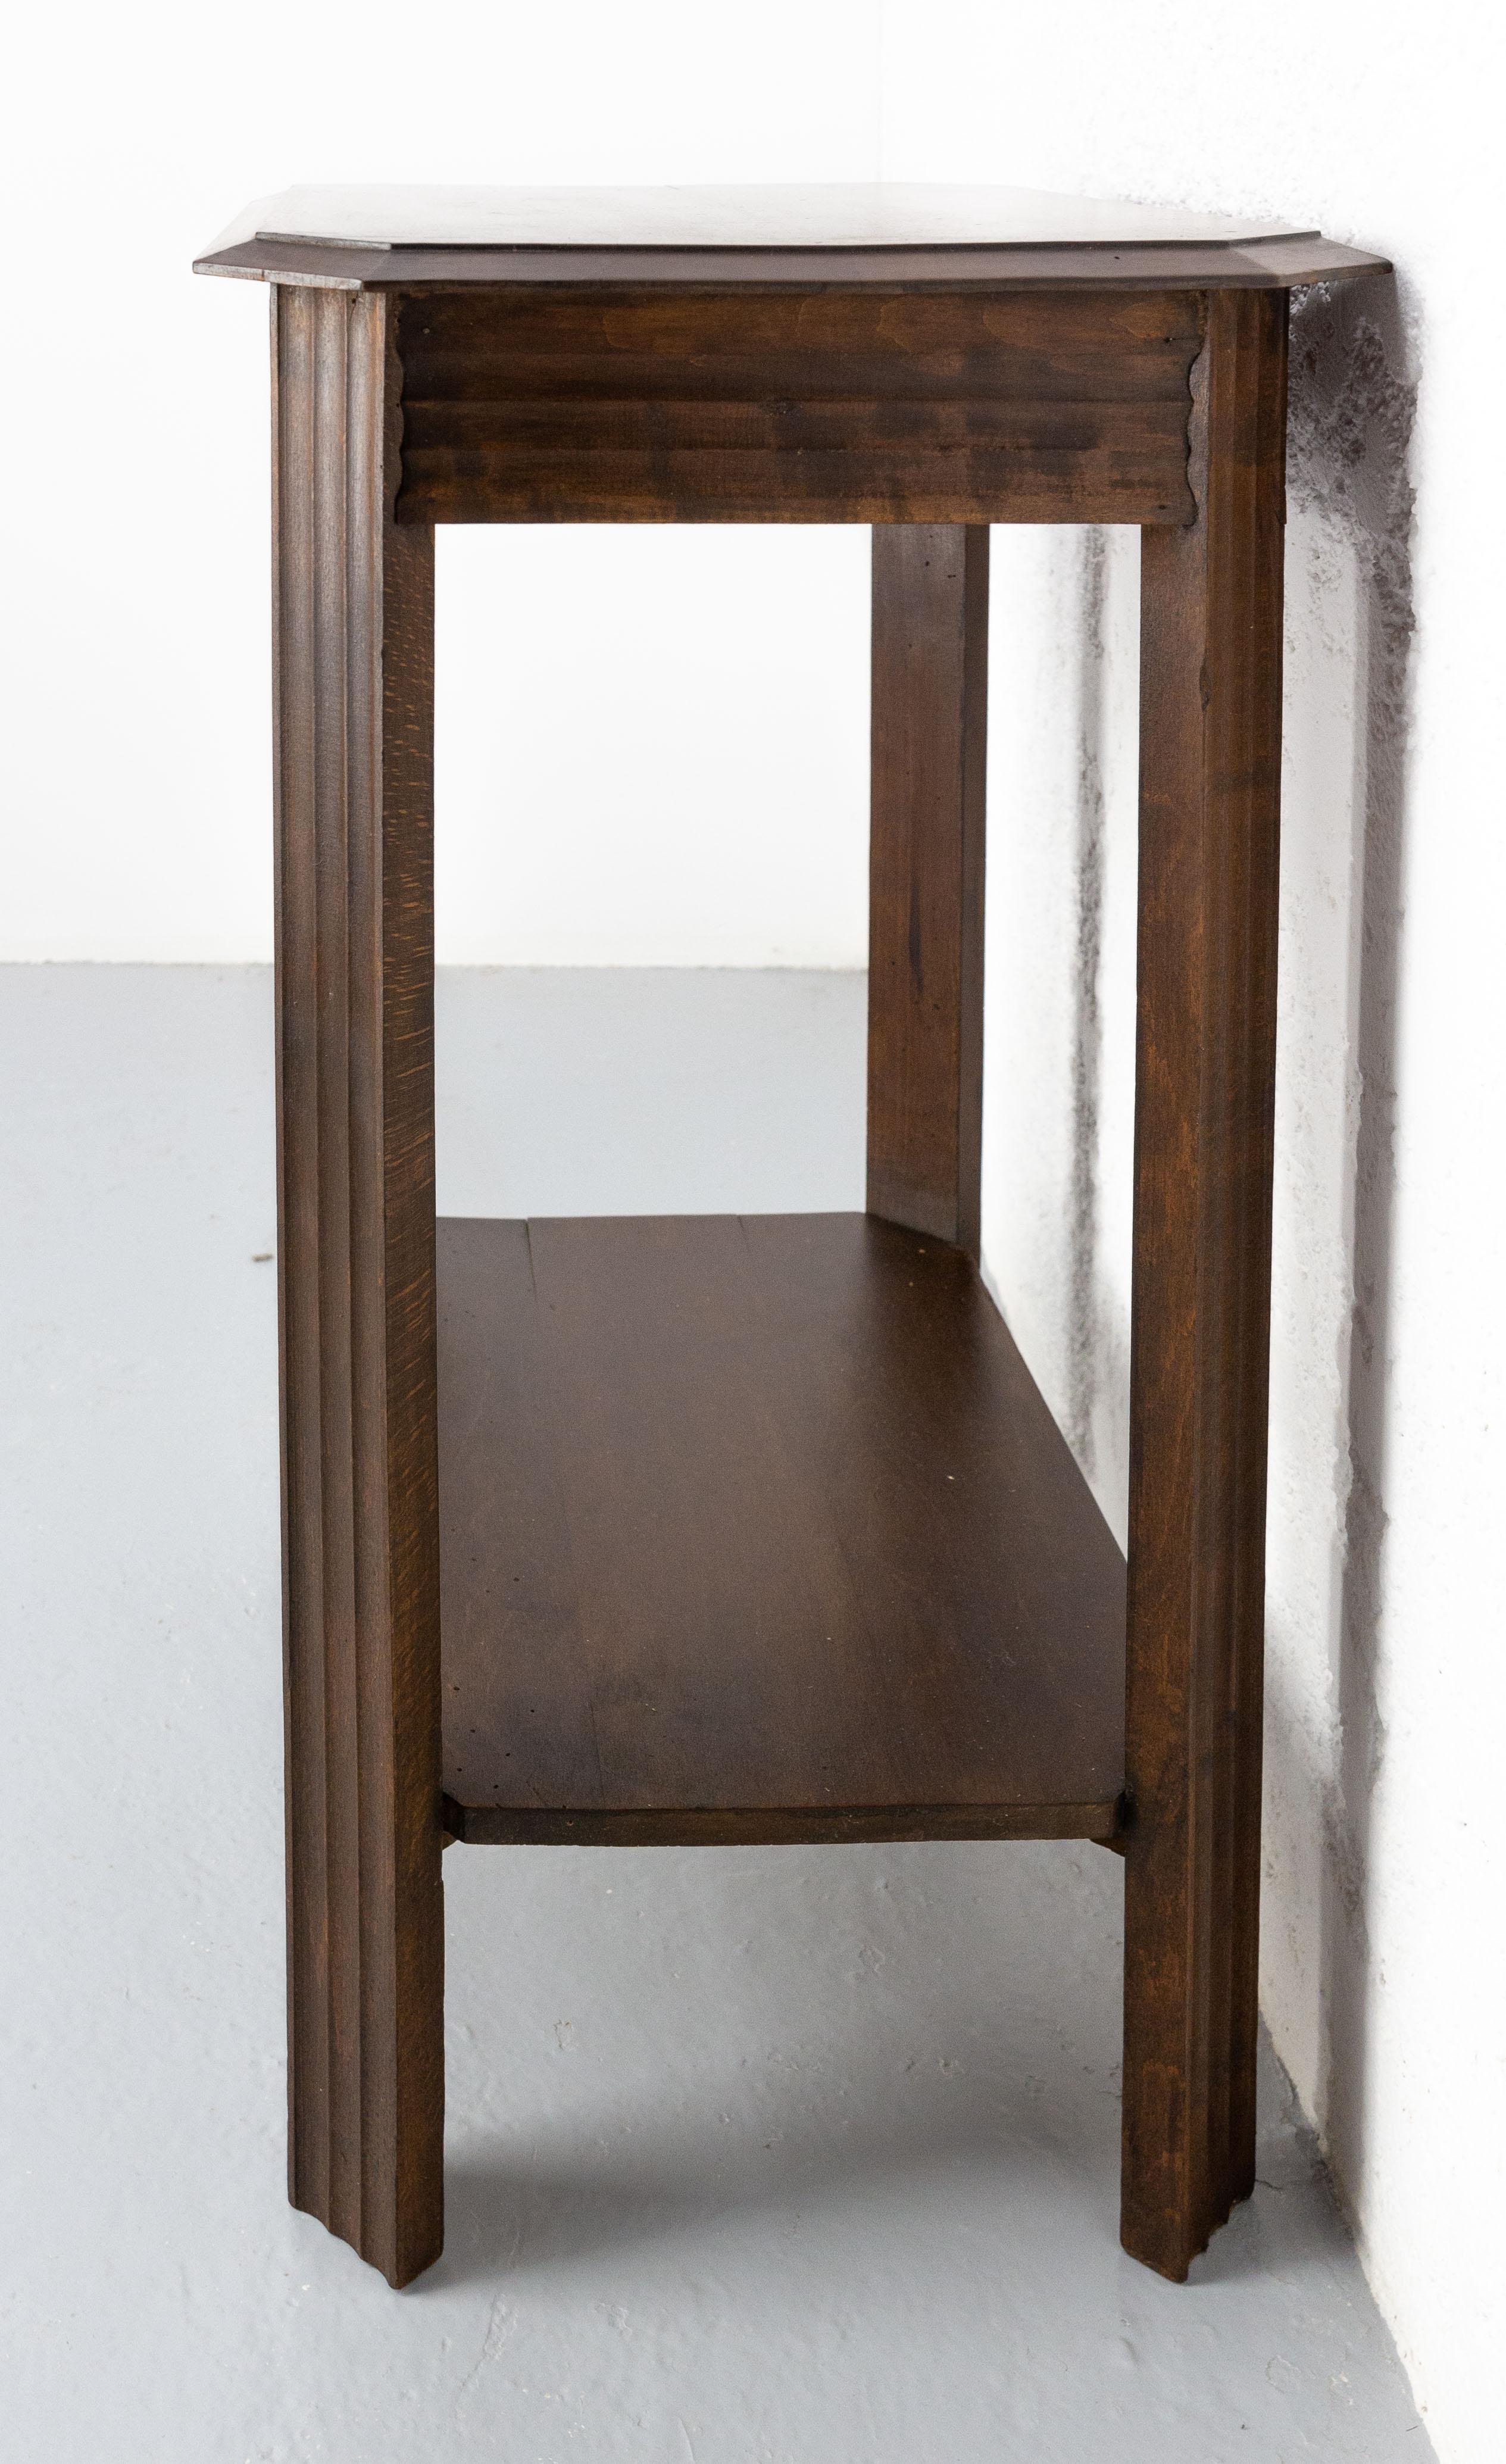 Mid-20th Century French Poplar Side Table Sellette or Nightstand Art Deco, circa 1930 For Sale